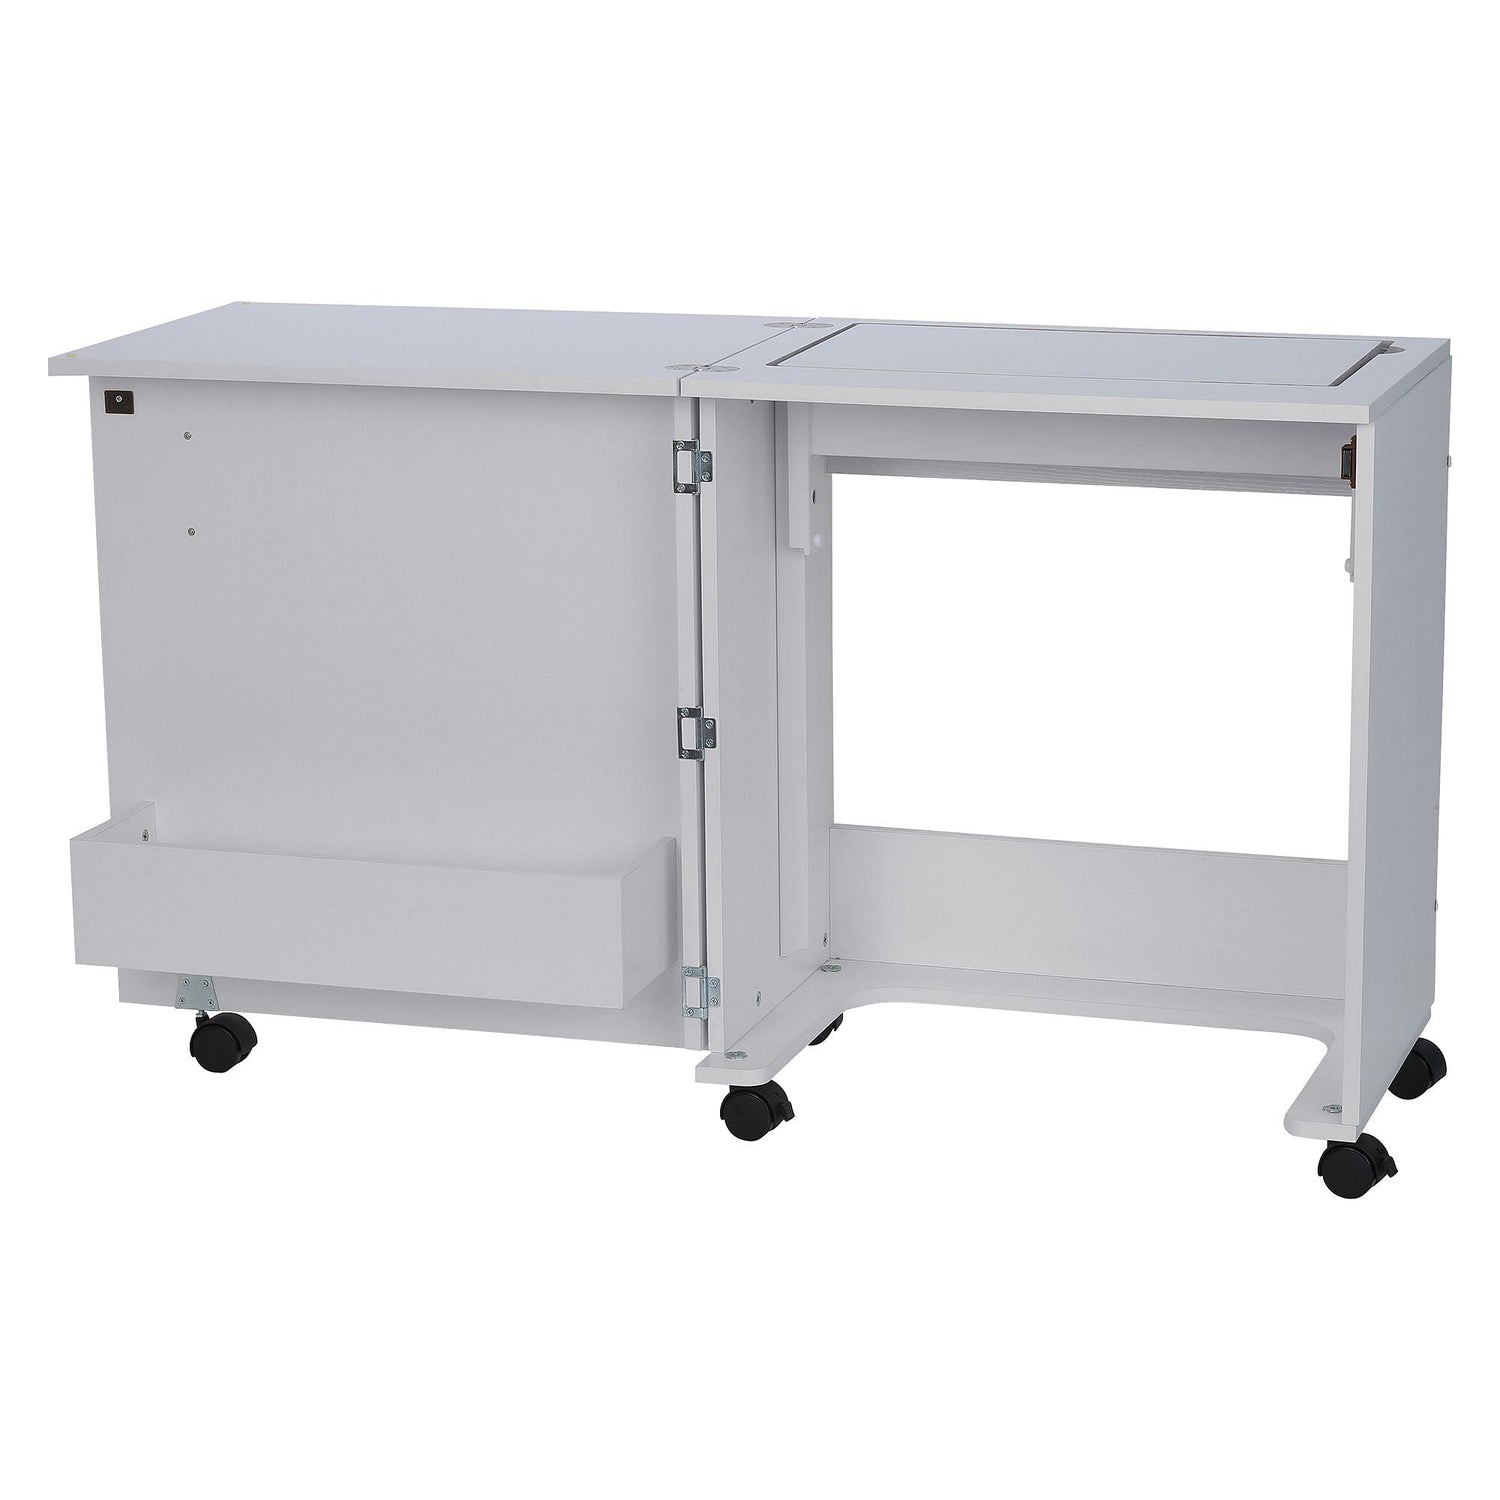 63'' x 19'' Foldable Sewing Table with Sewing Machine Platform and